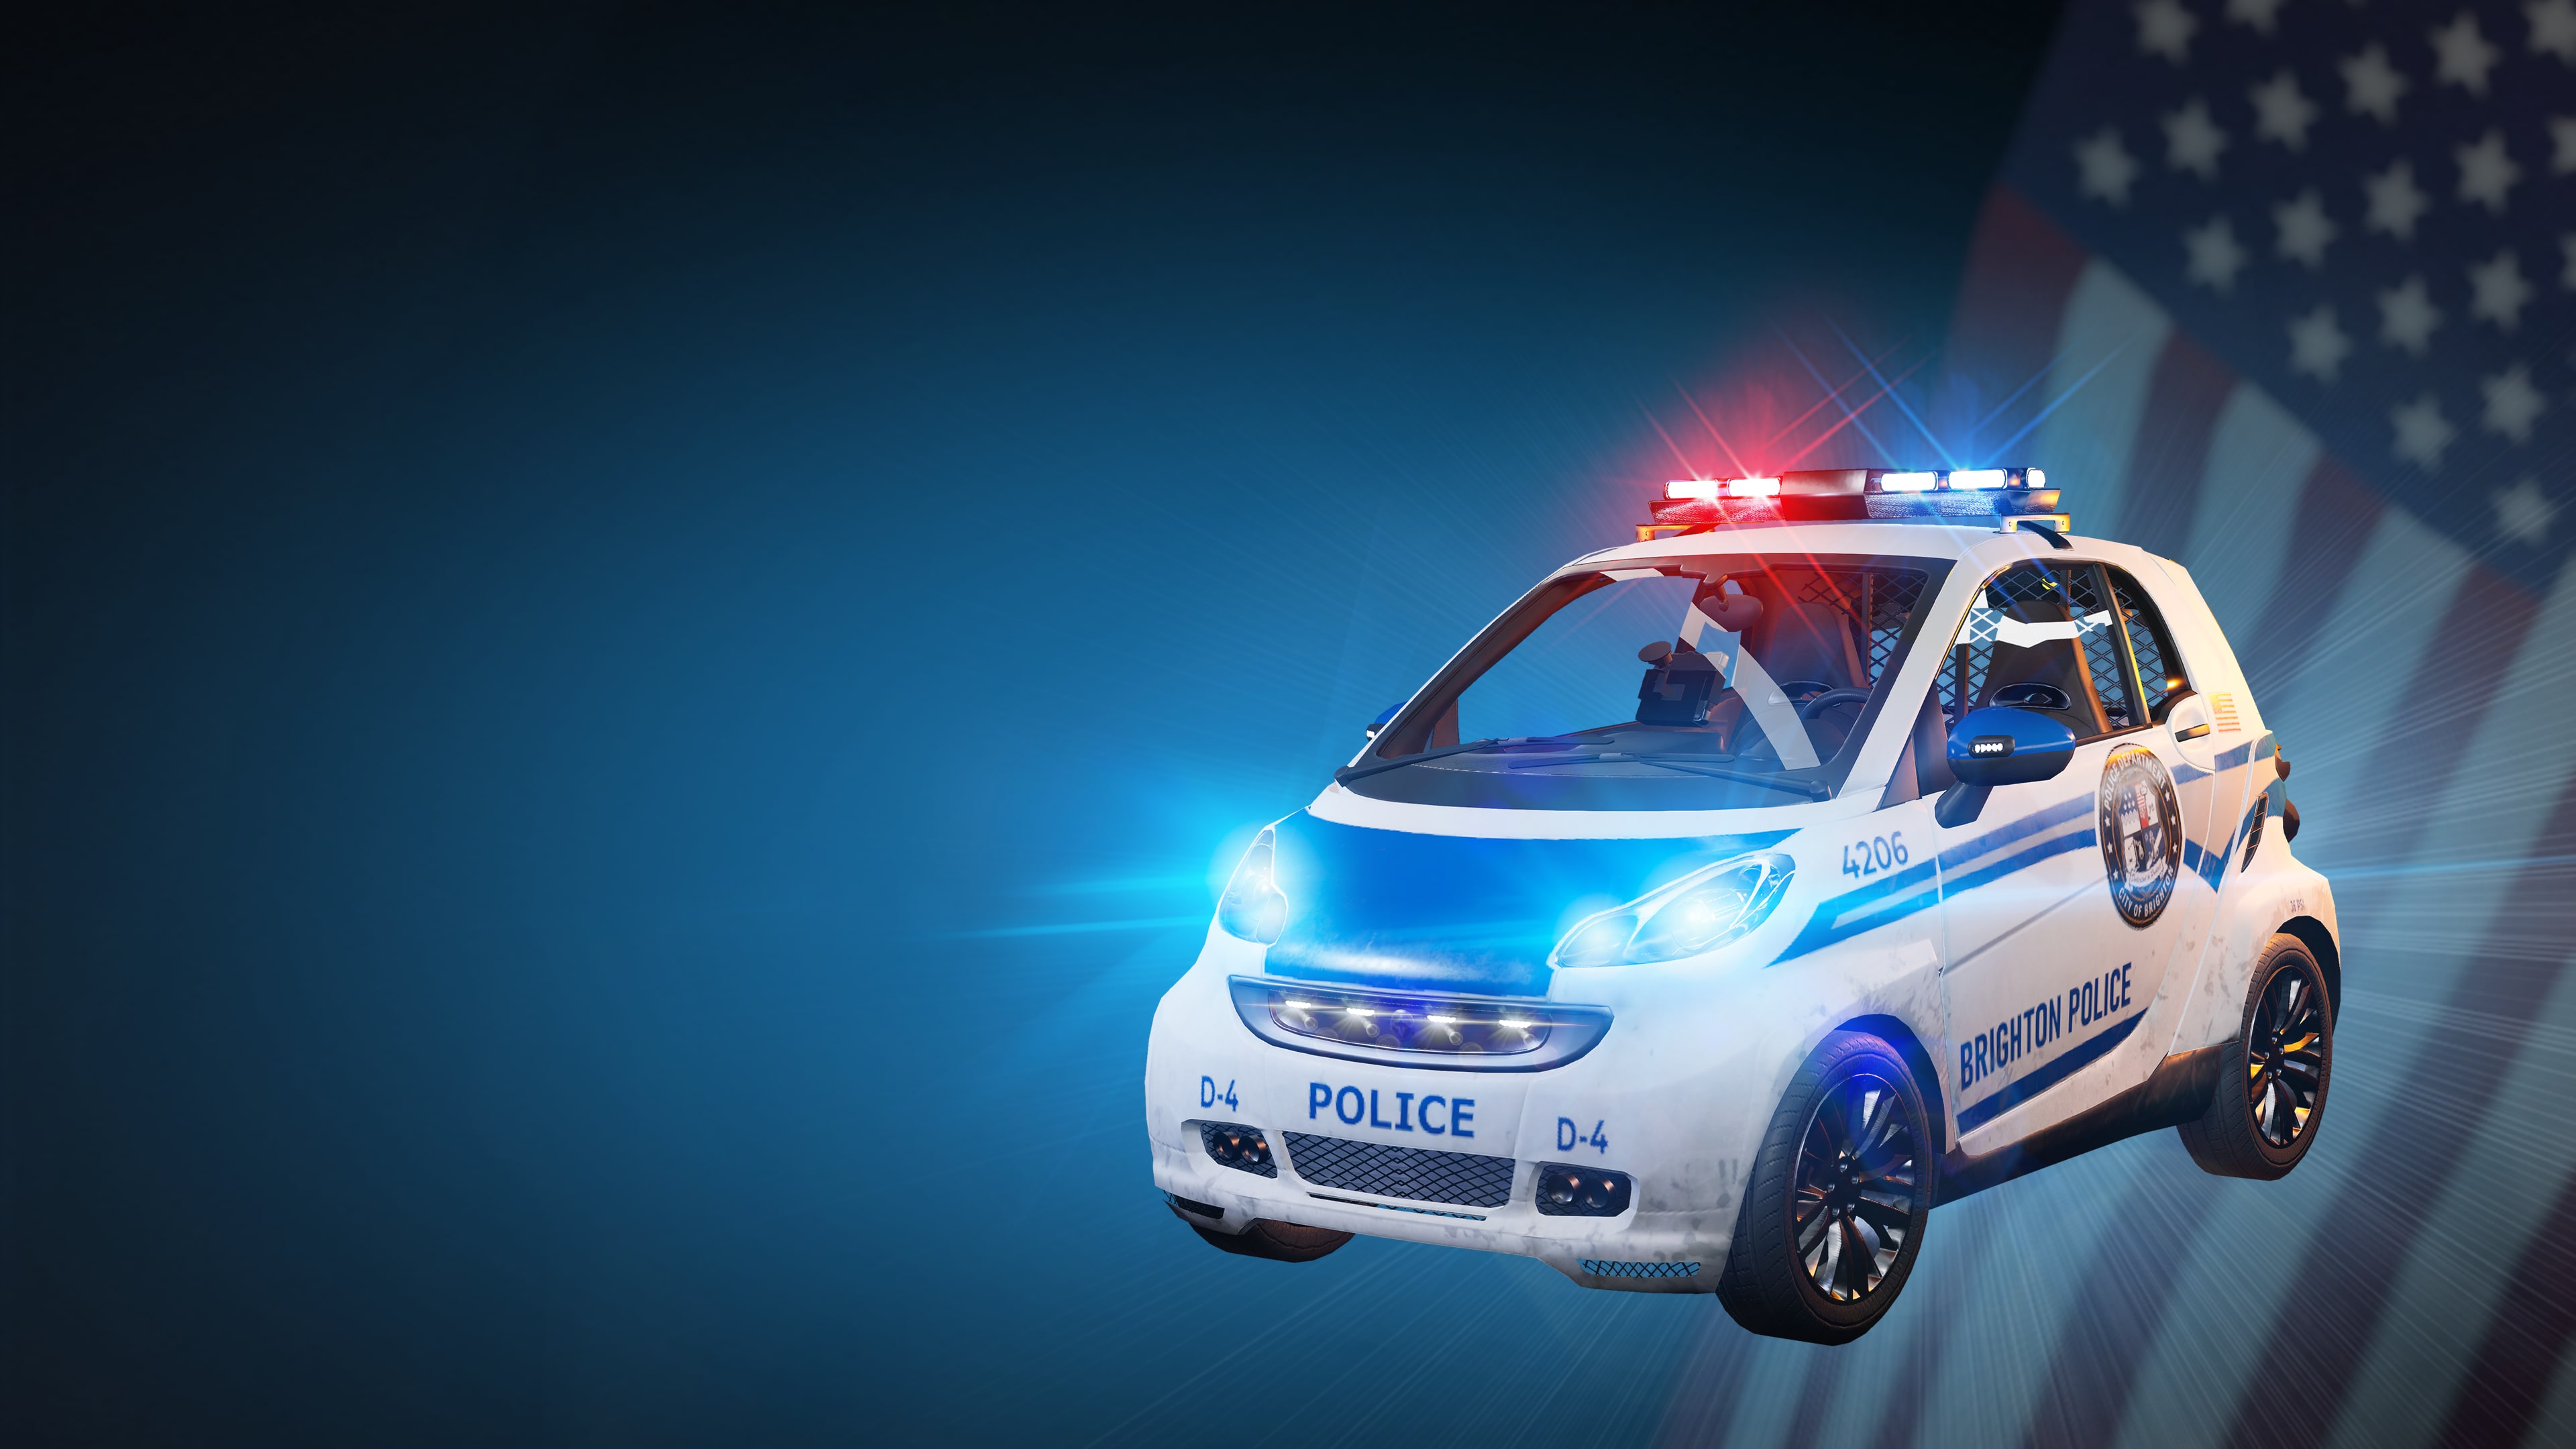 DLC Compact Police Vehicle Patrol Officers : Police Simulator: